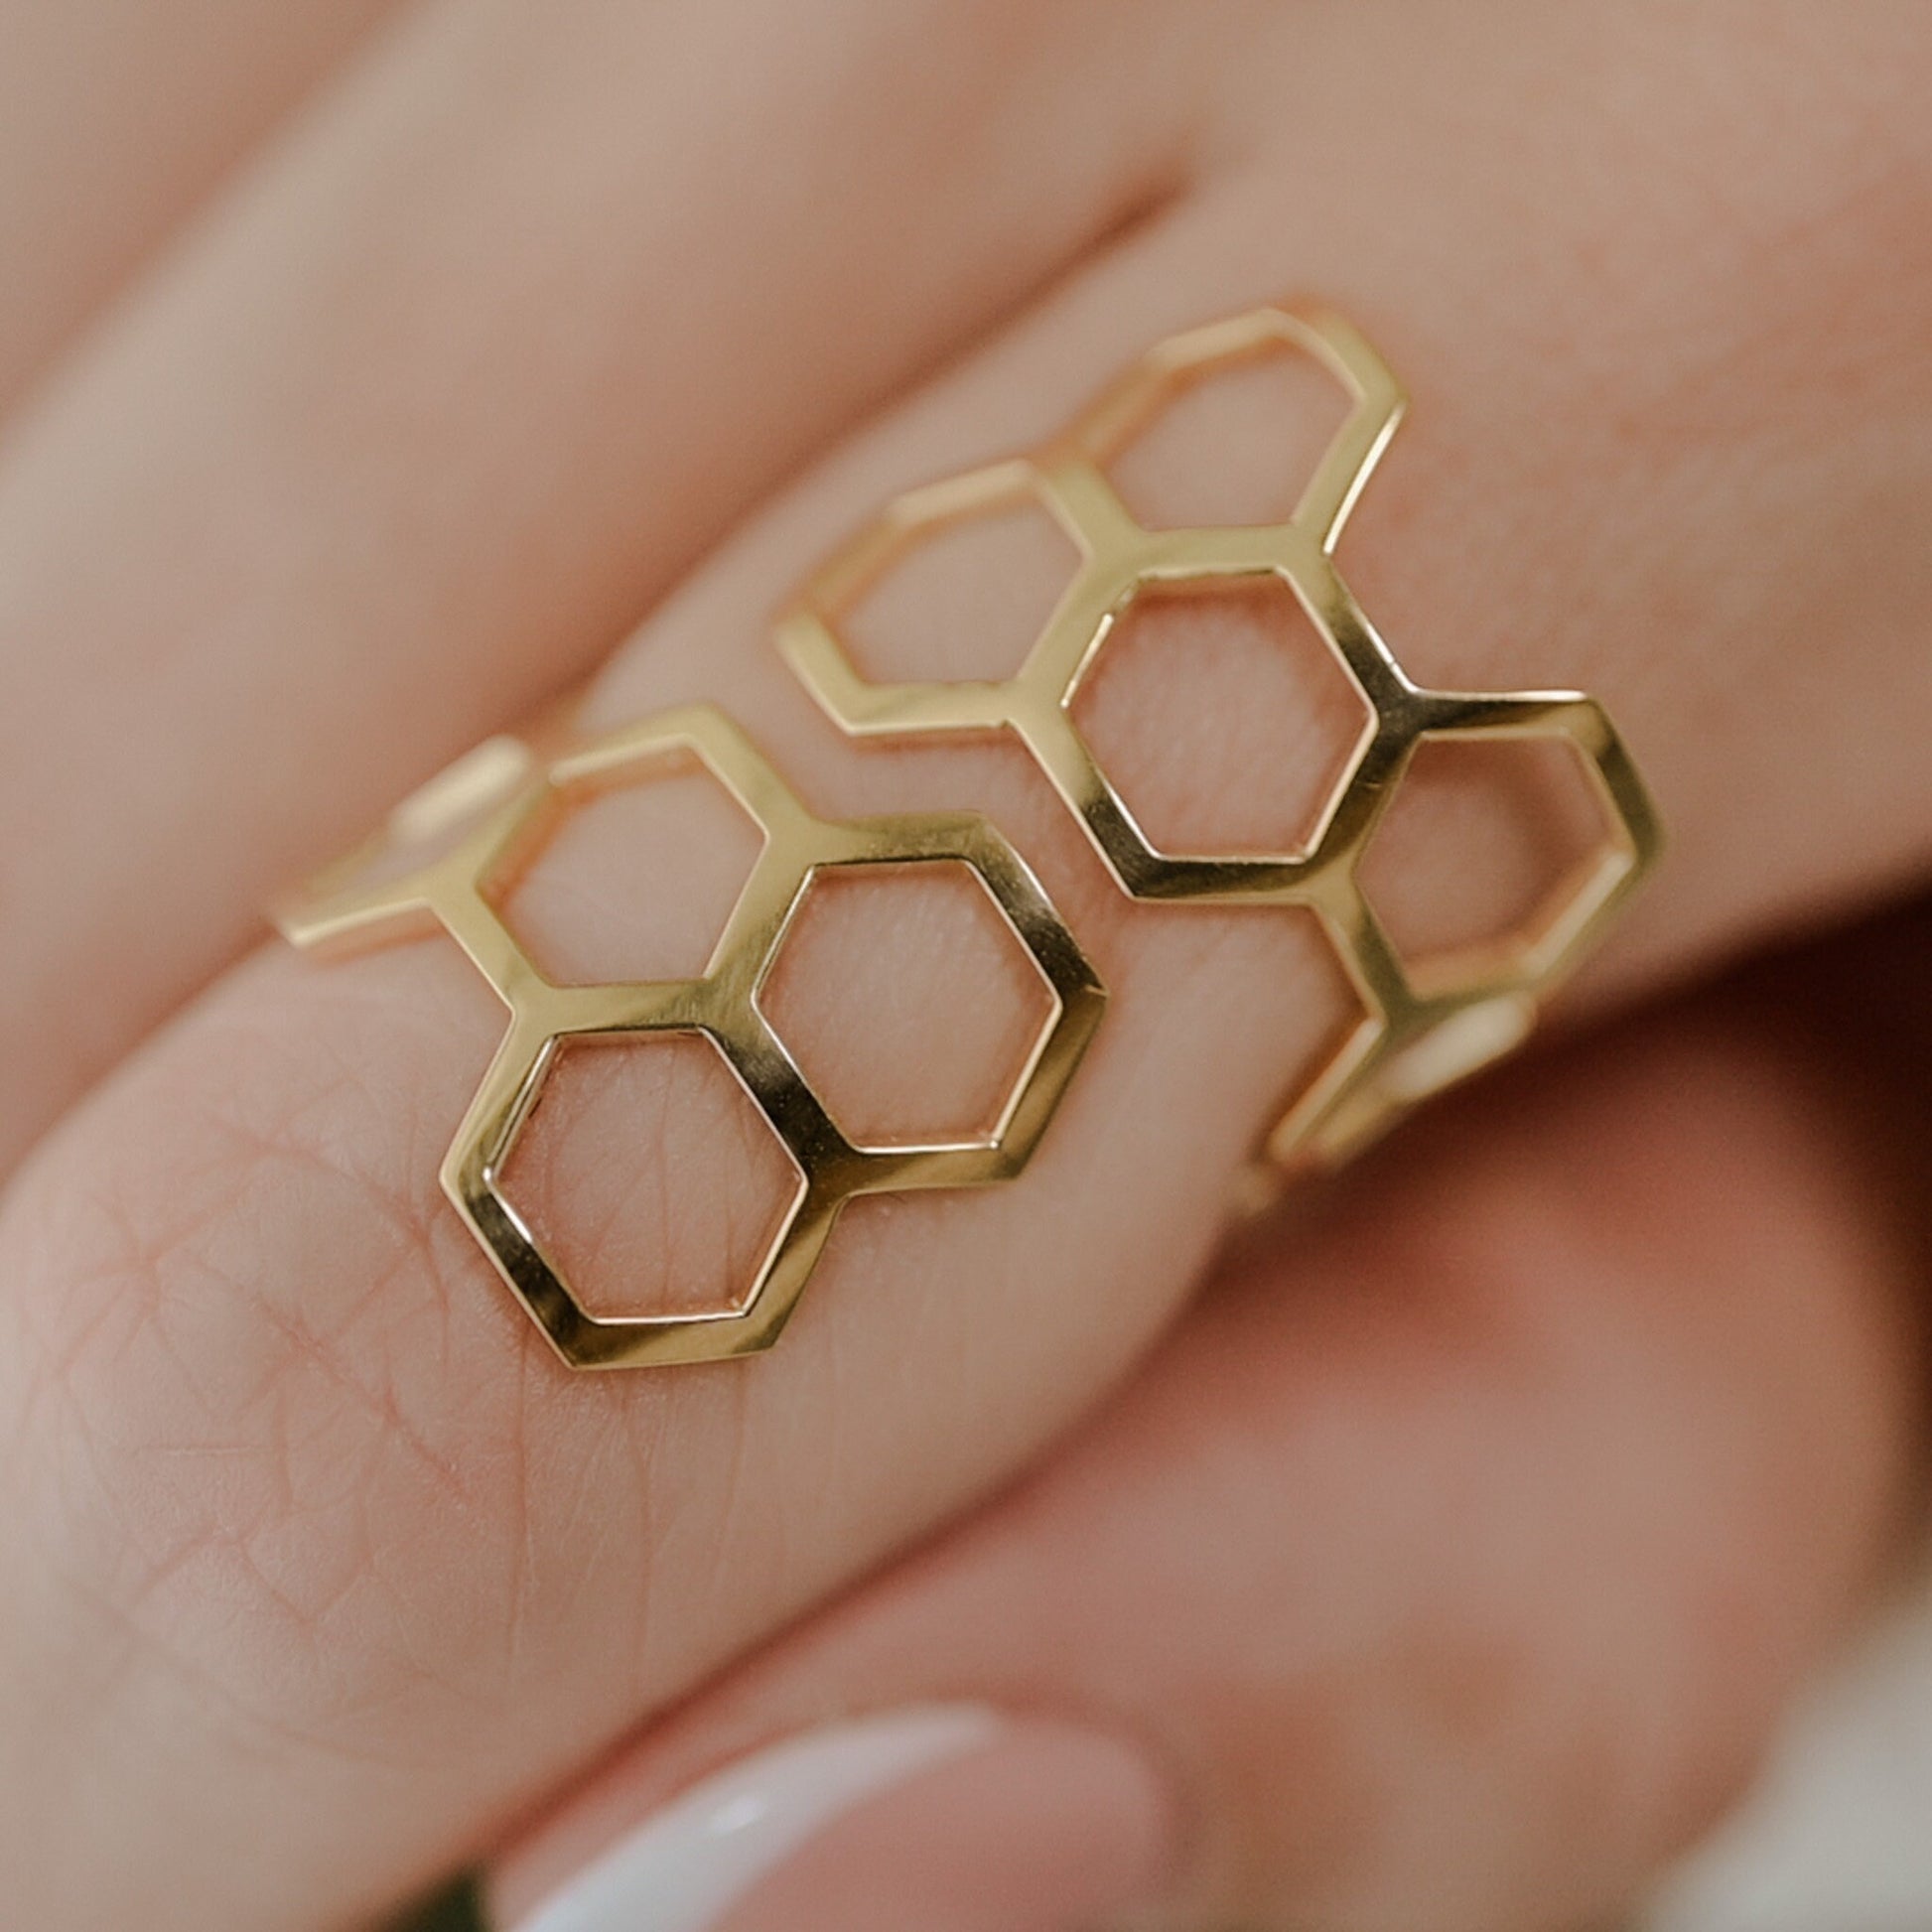 Hexagon Honey Comb Ring Adjustable Ring in Sterling Silver, Vermeil, 18K Gold Plate